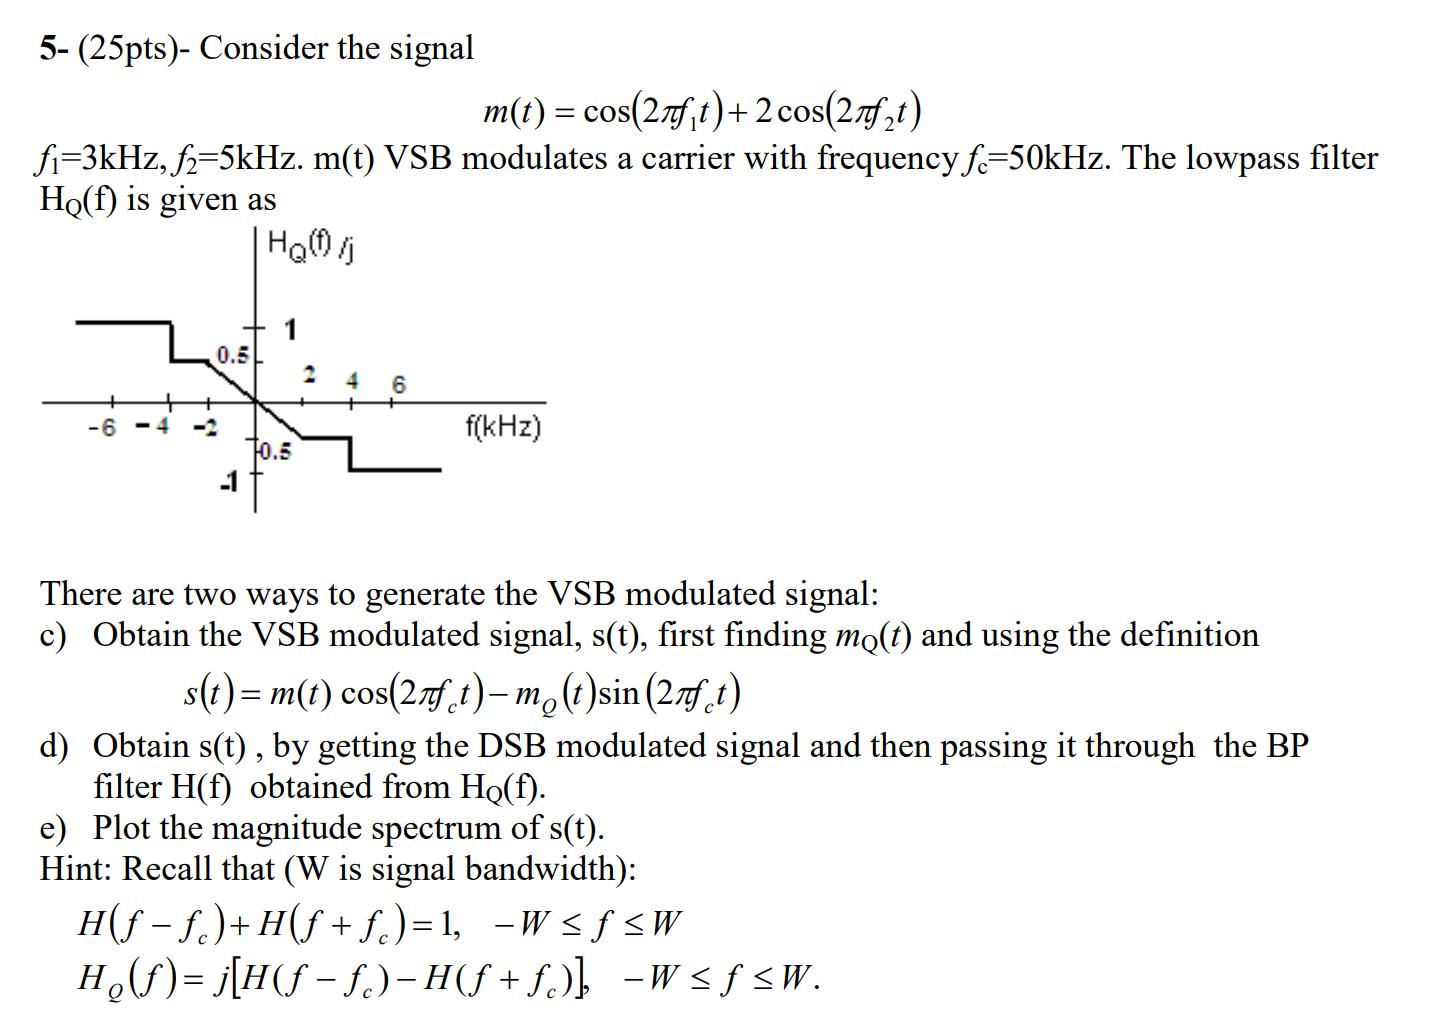 5- (25pts)- Consider the signal m(t) = cos(27ft) + 2 cos(27ft) fi=3kHz, f=5kHz. m(t) VSB modulates a carrier